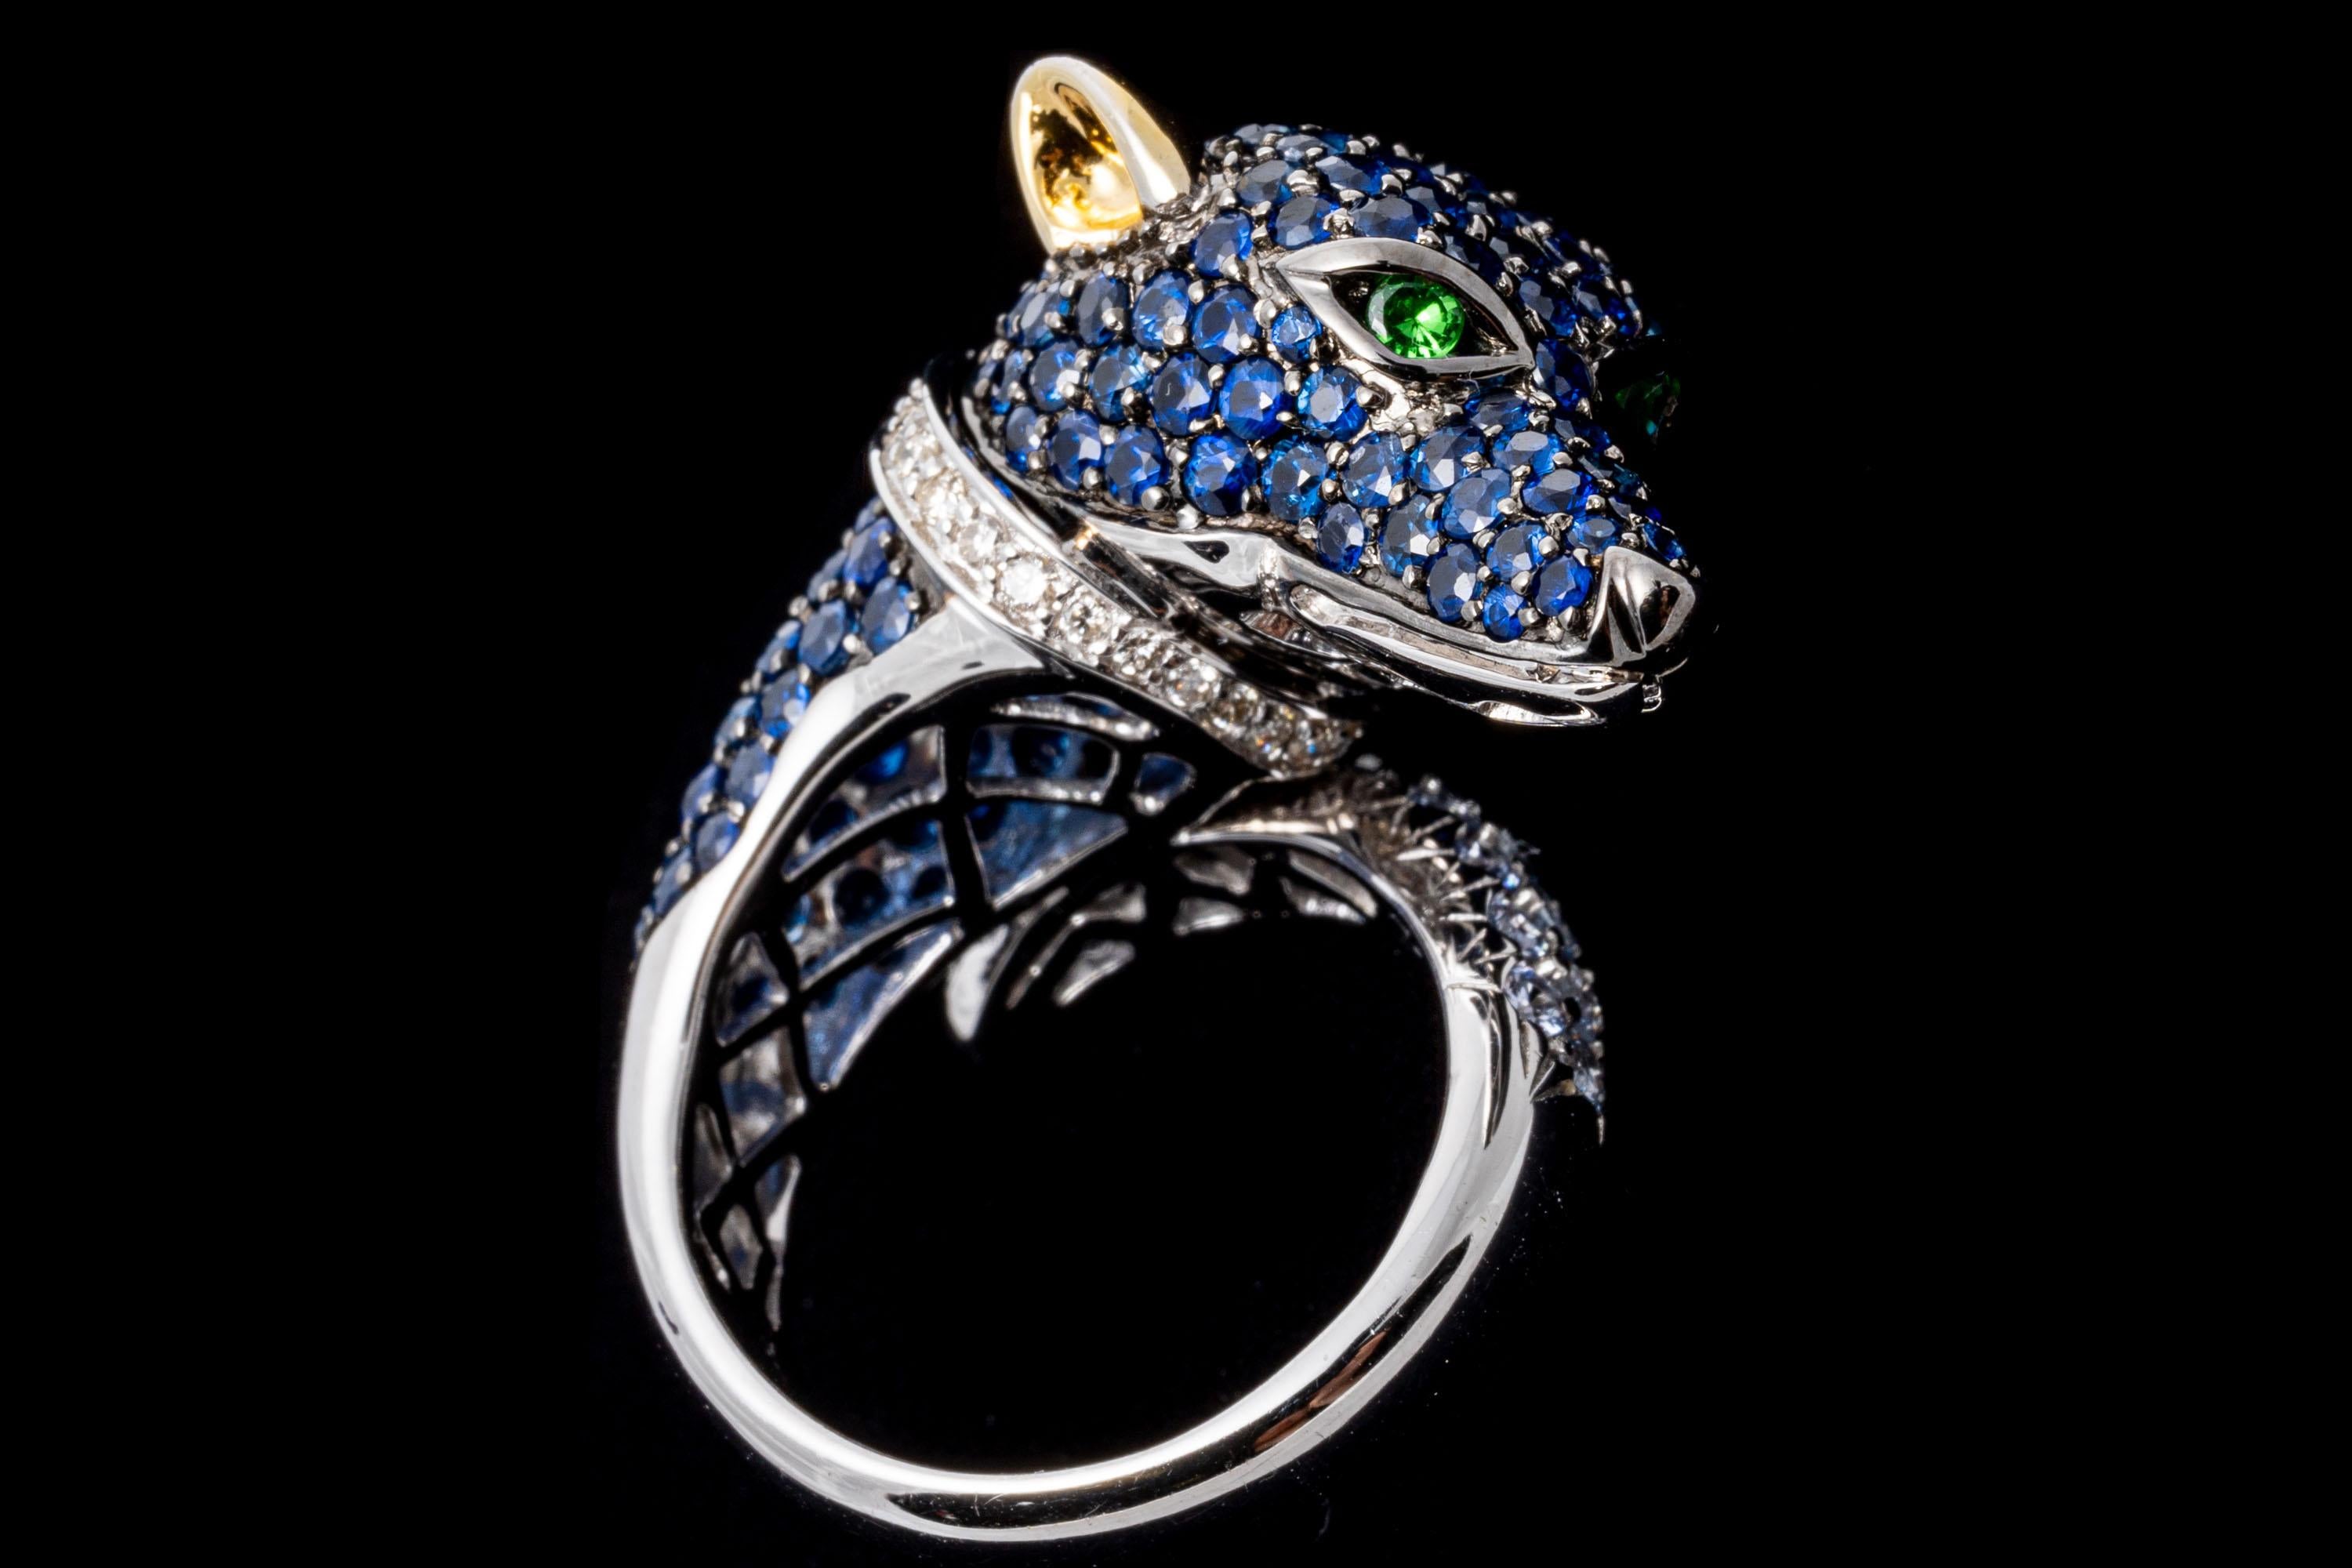 18k White Gold Pave Set Sapphire, Diamond And Tsavorite Dog Ring, Size 7.25 For Sale 2